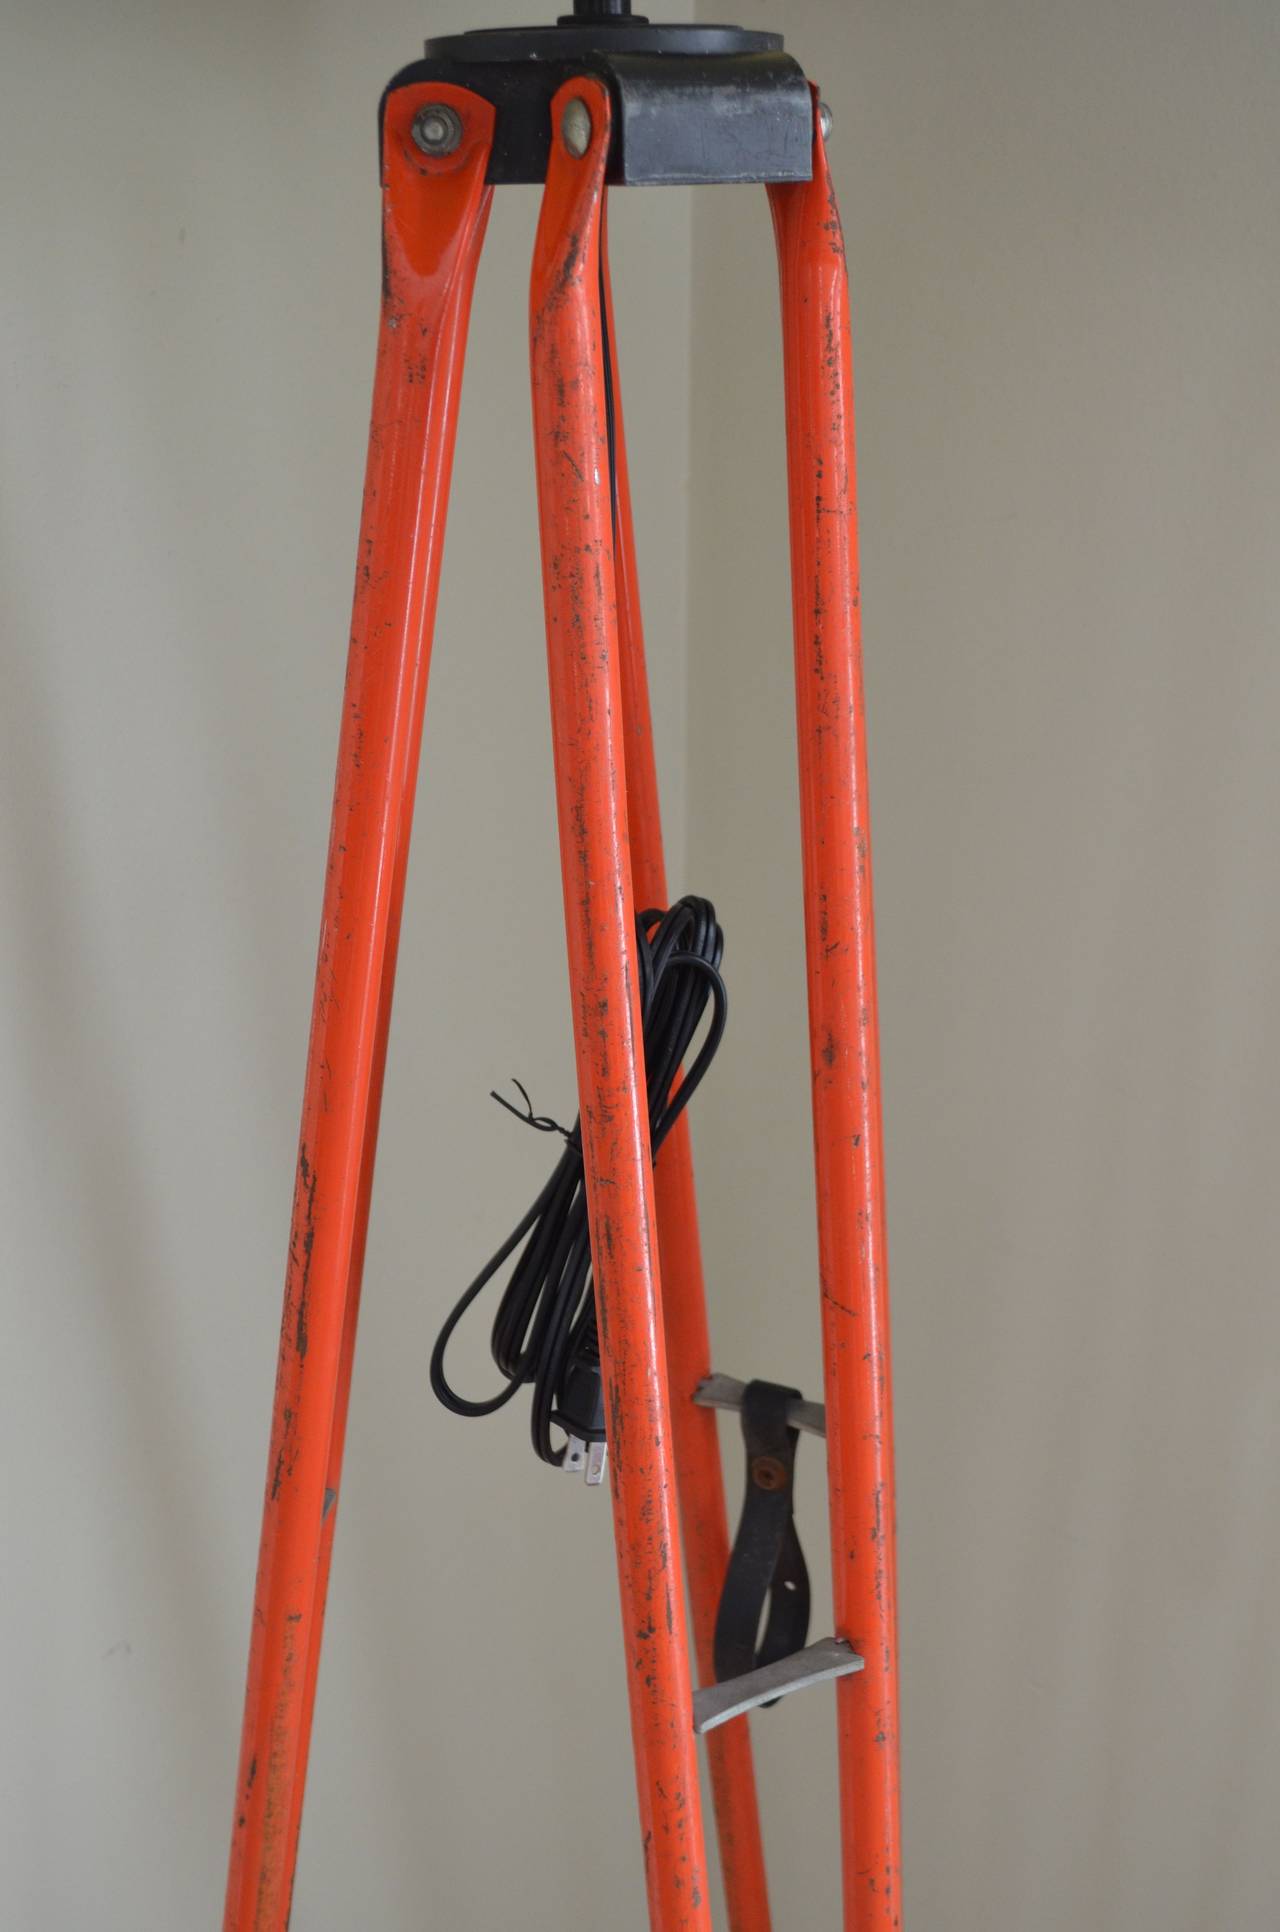 American Surveyors's Tripod from David White as Floor Lamp